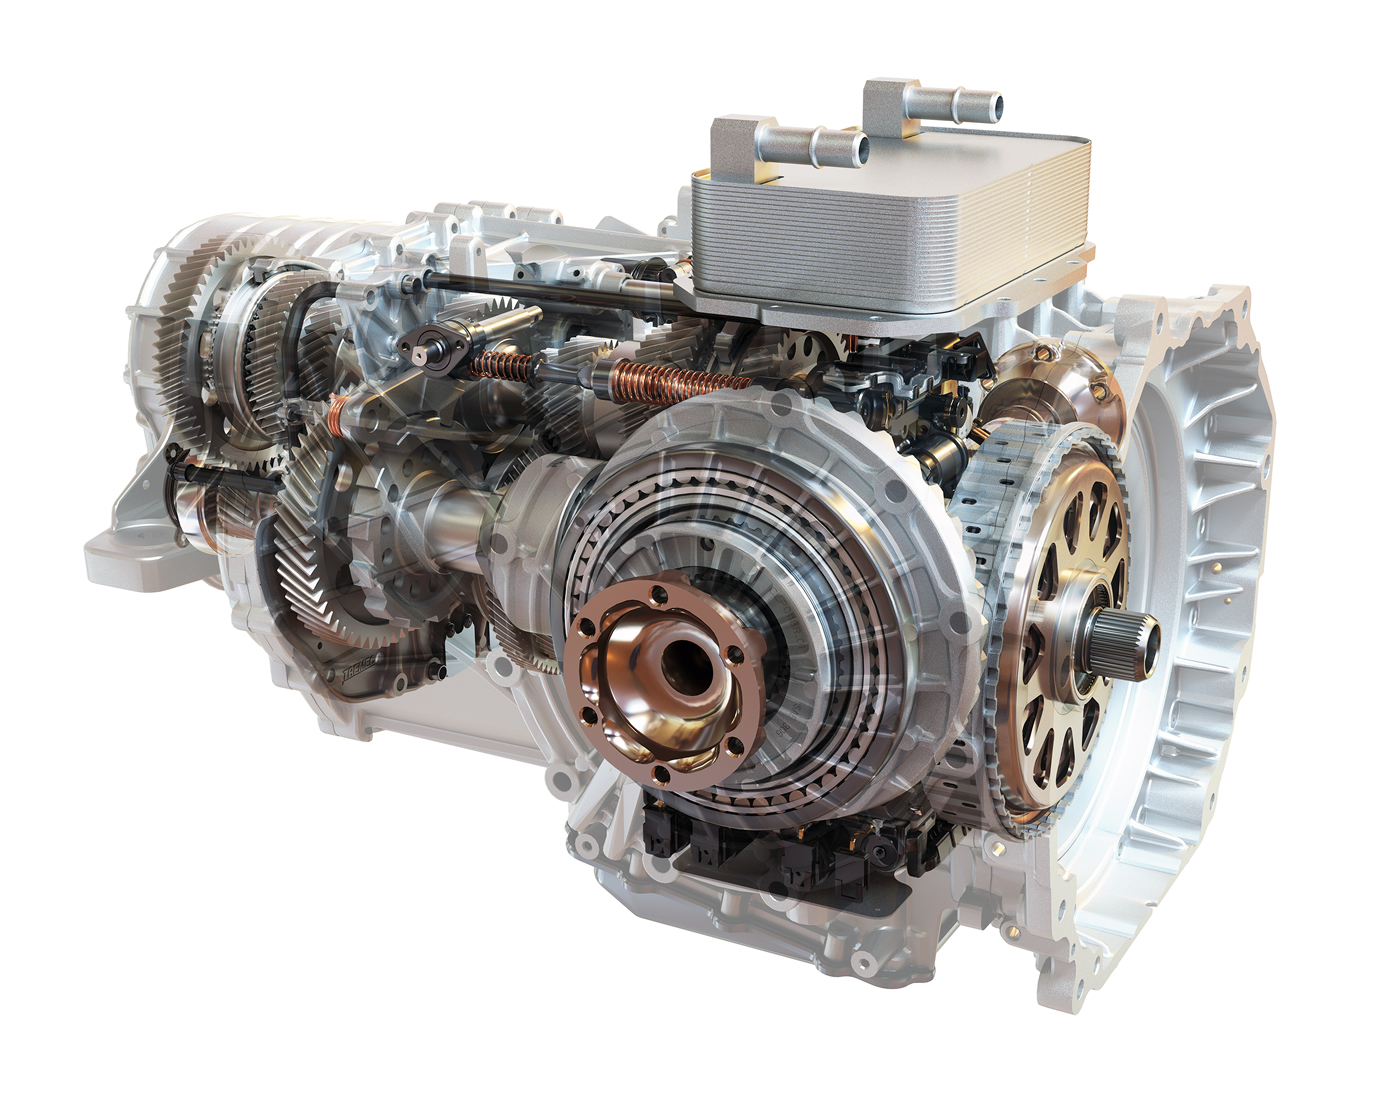 Corvette's first eight speed dual-clutch transmission (Photo courtesy of TREMEC).